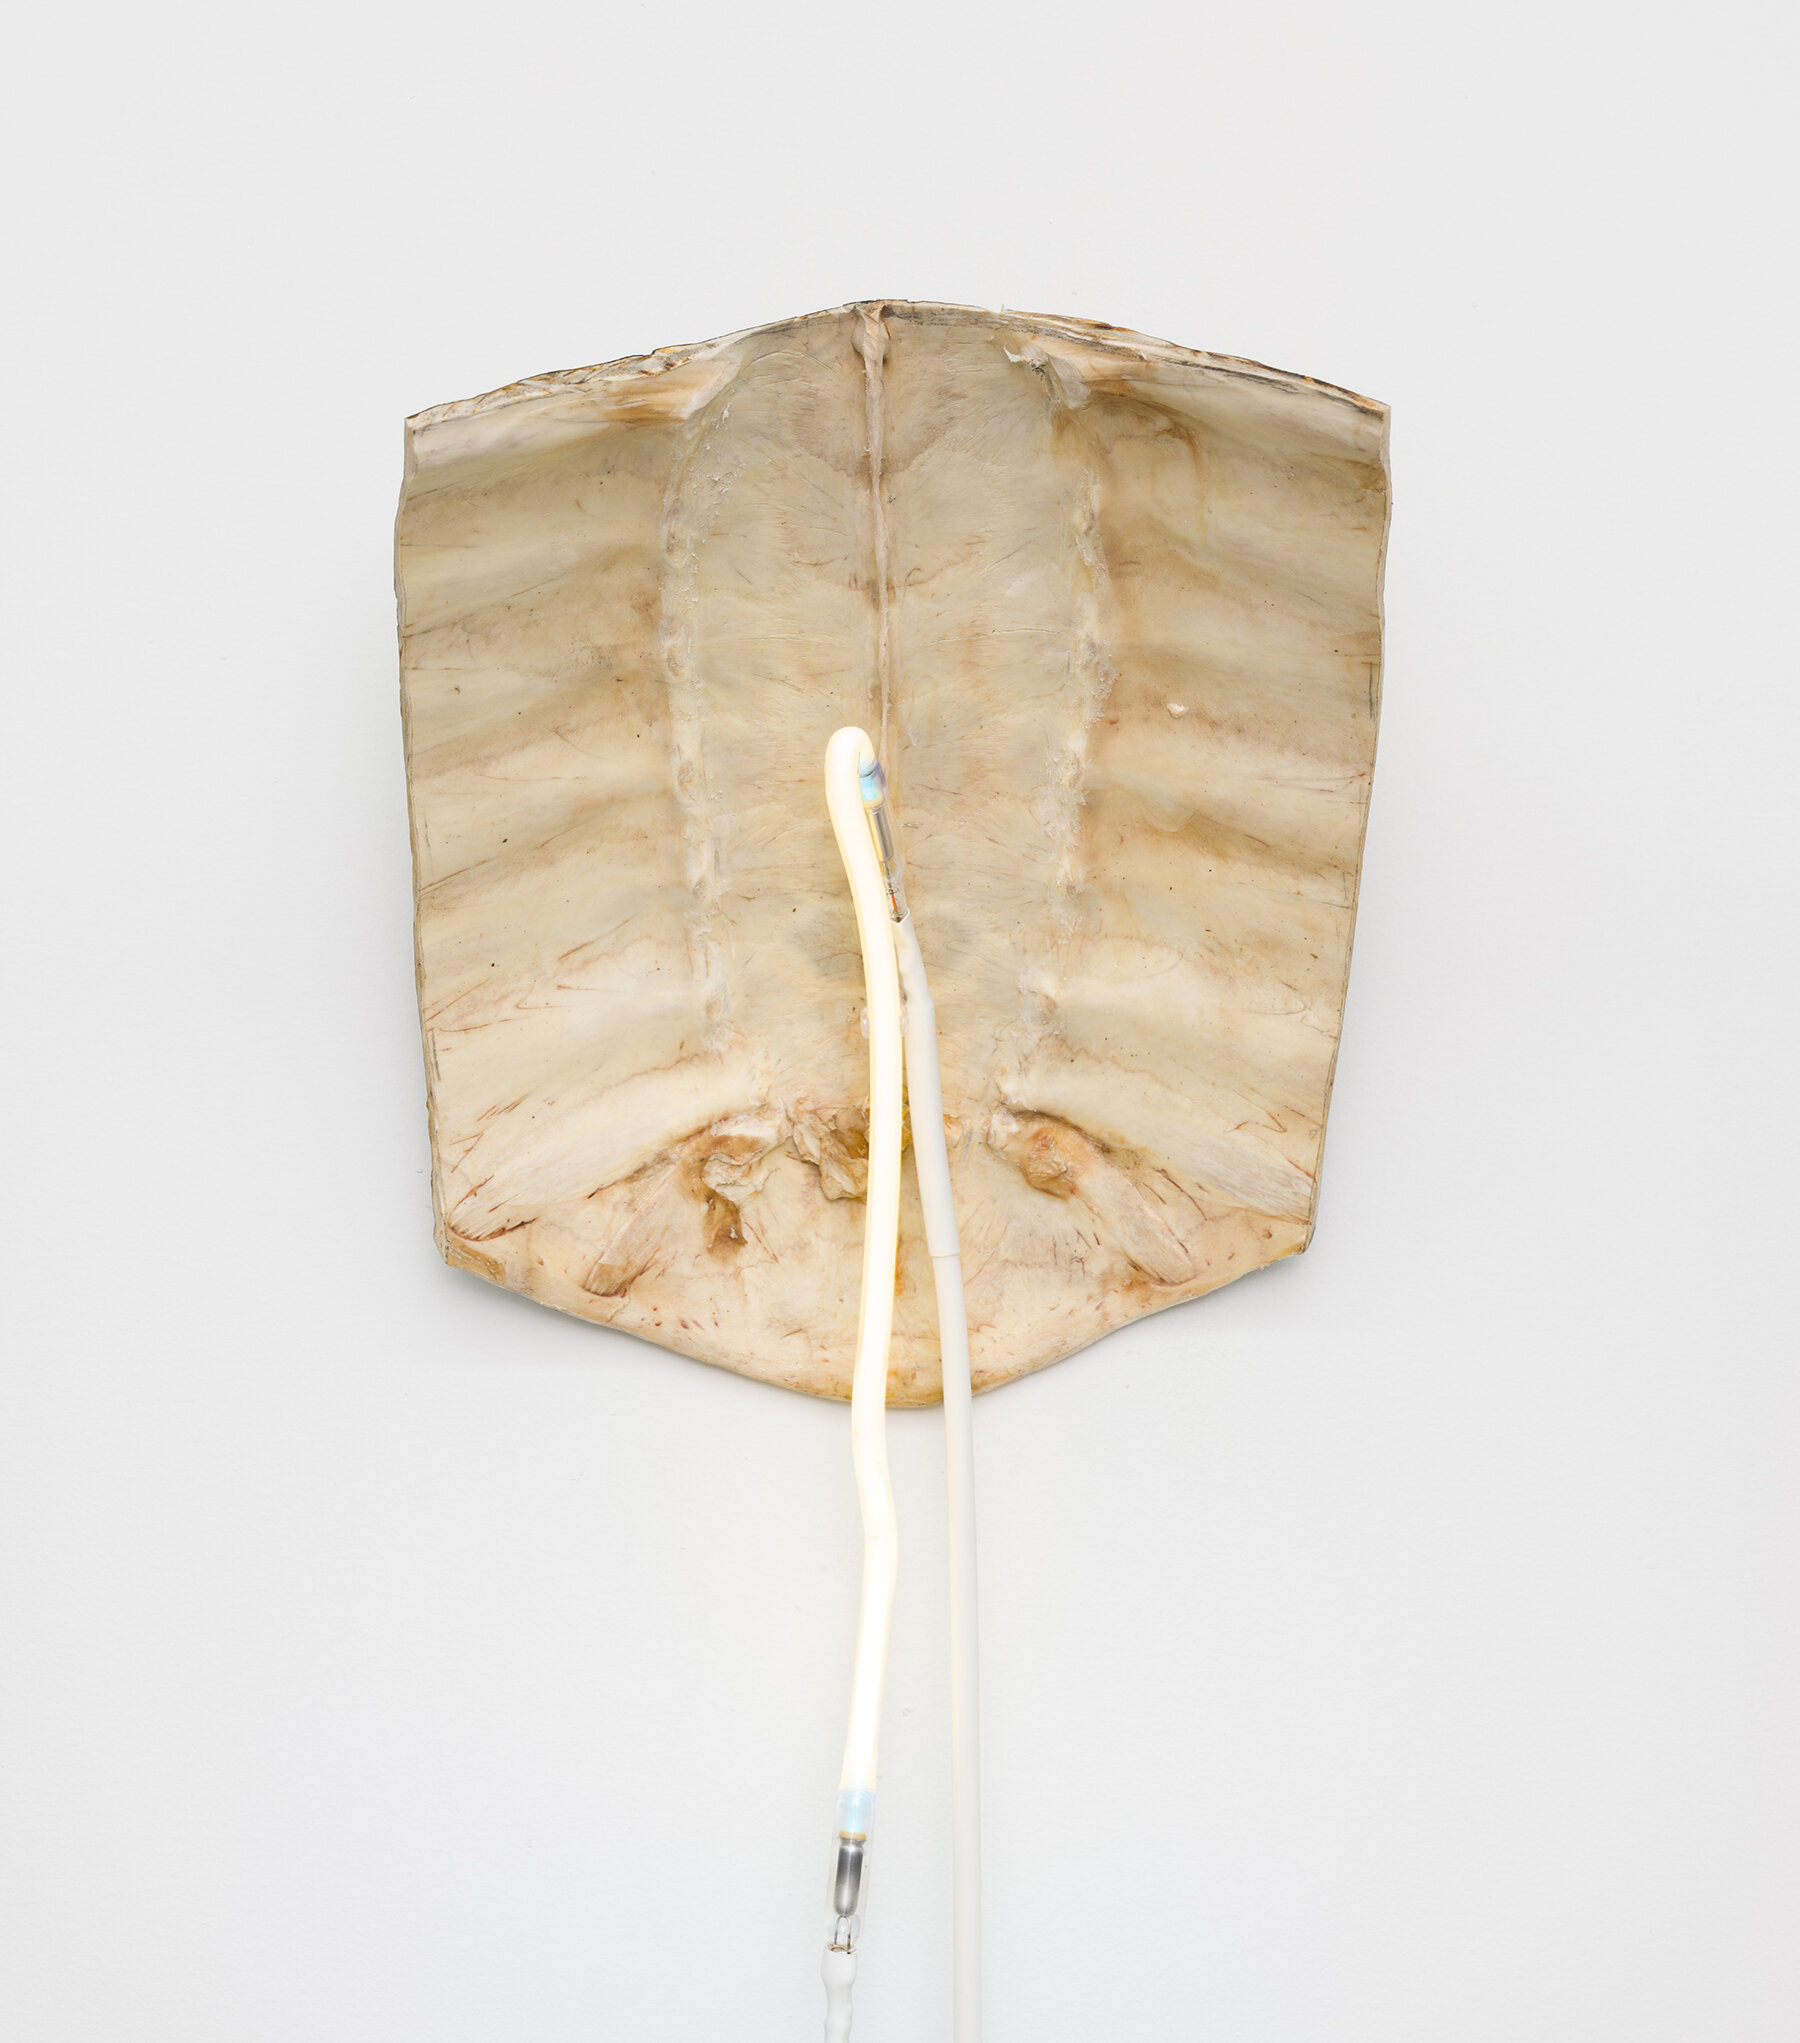  Sean Donovan  Control Command Delete 2 , 2020 snapping turtle shell, neon, glass tubing, silicon wire,  transformer, acrylic tube support, hardware 15 x 8 1⁄2 x 6 inches (38 x 22 x 15 cm) SD55 